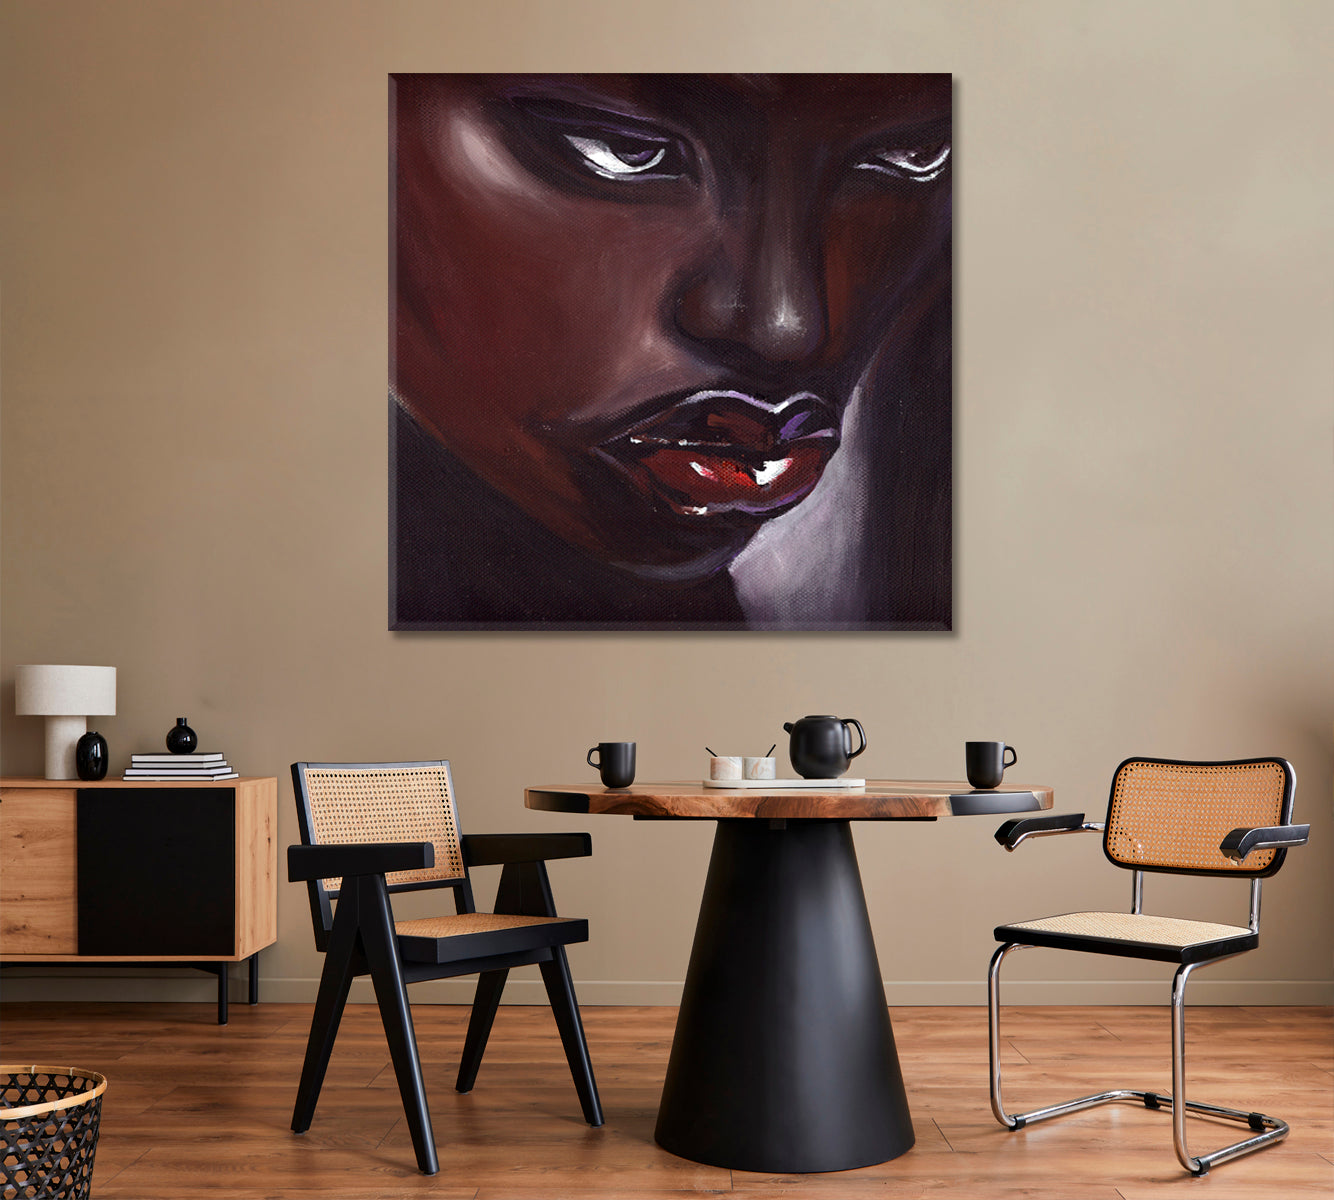 MAGIC DREAM Stunning Beauty African Women Trendy Unique Afrocentric Art - Square Panel African Style Canvas Print Artesty 1 Panel 12"x12" 